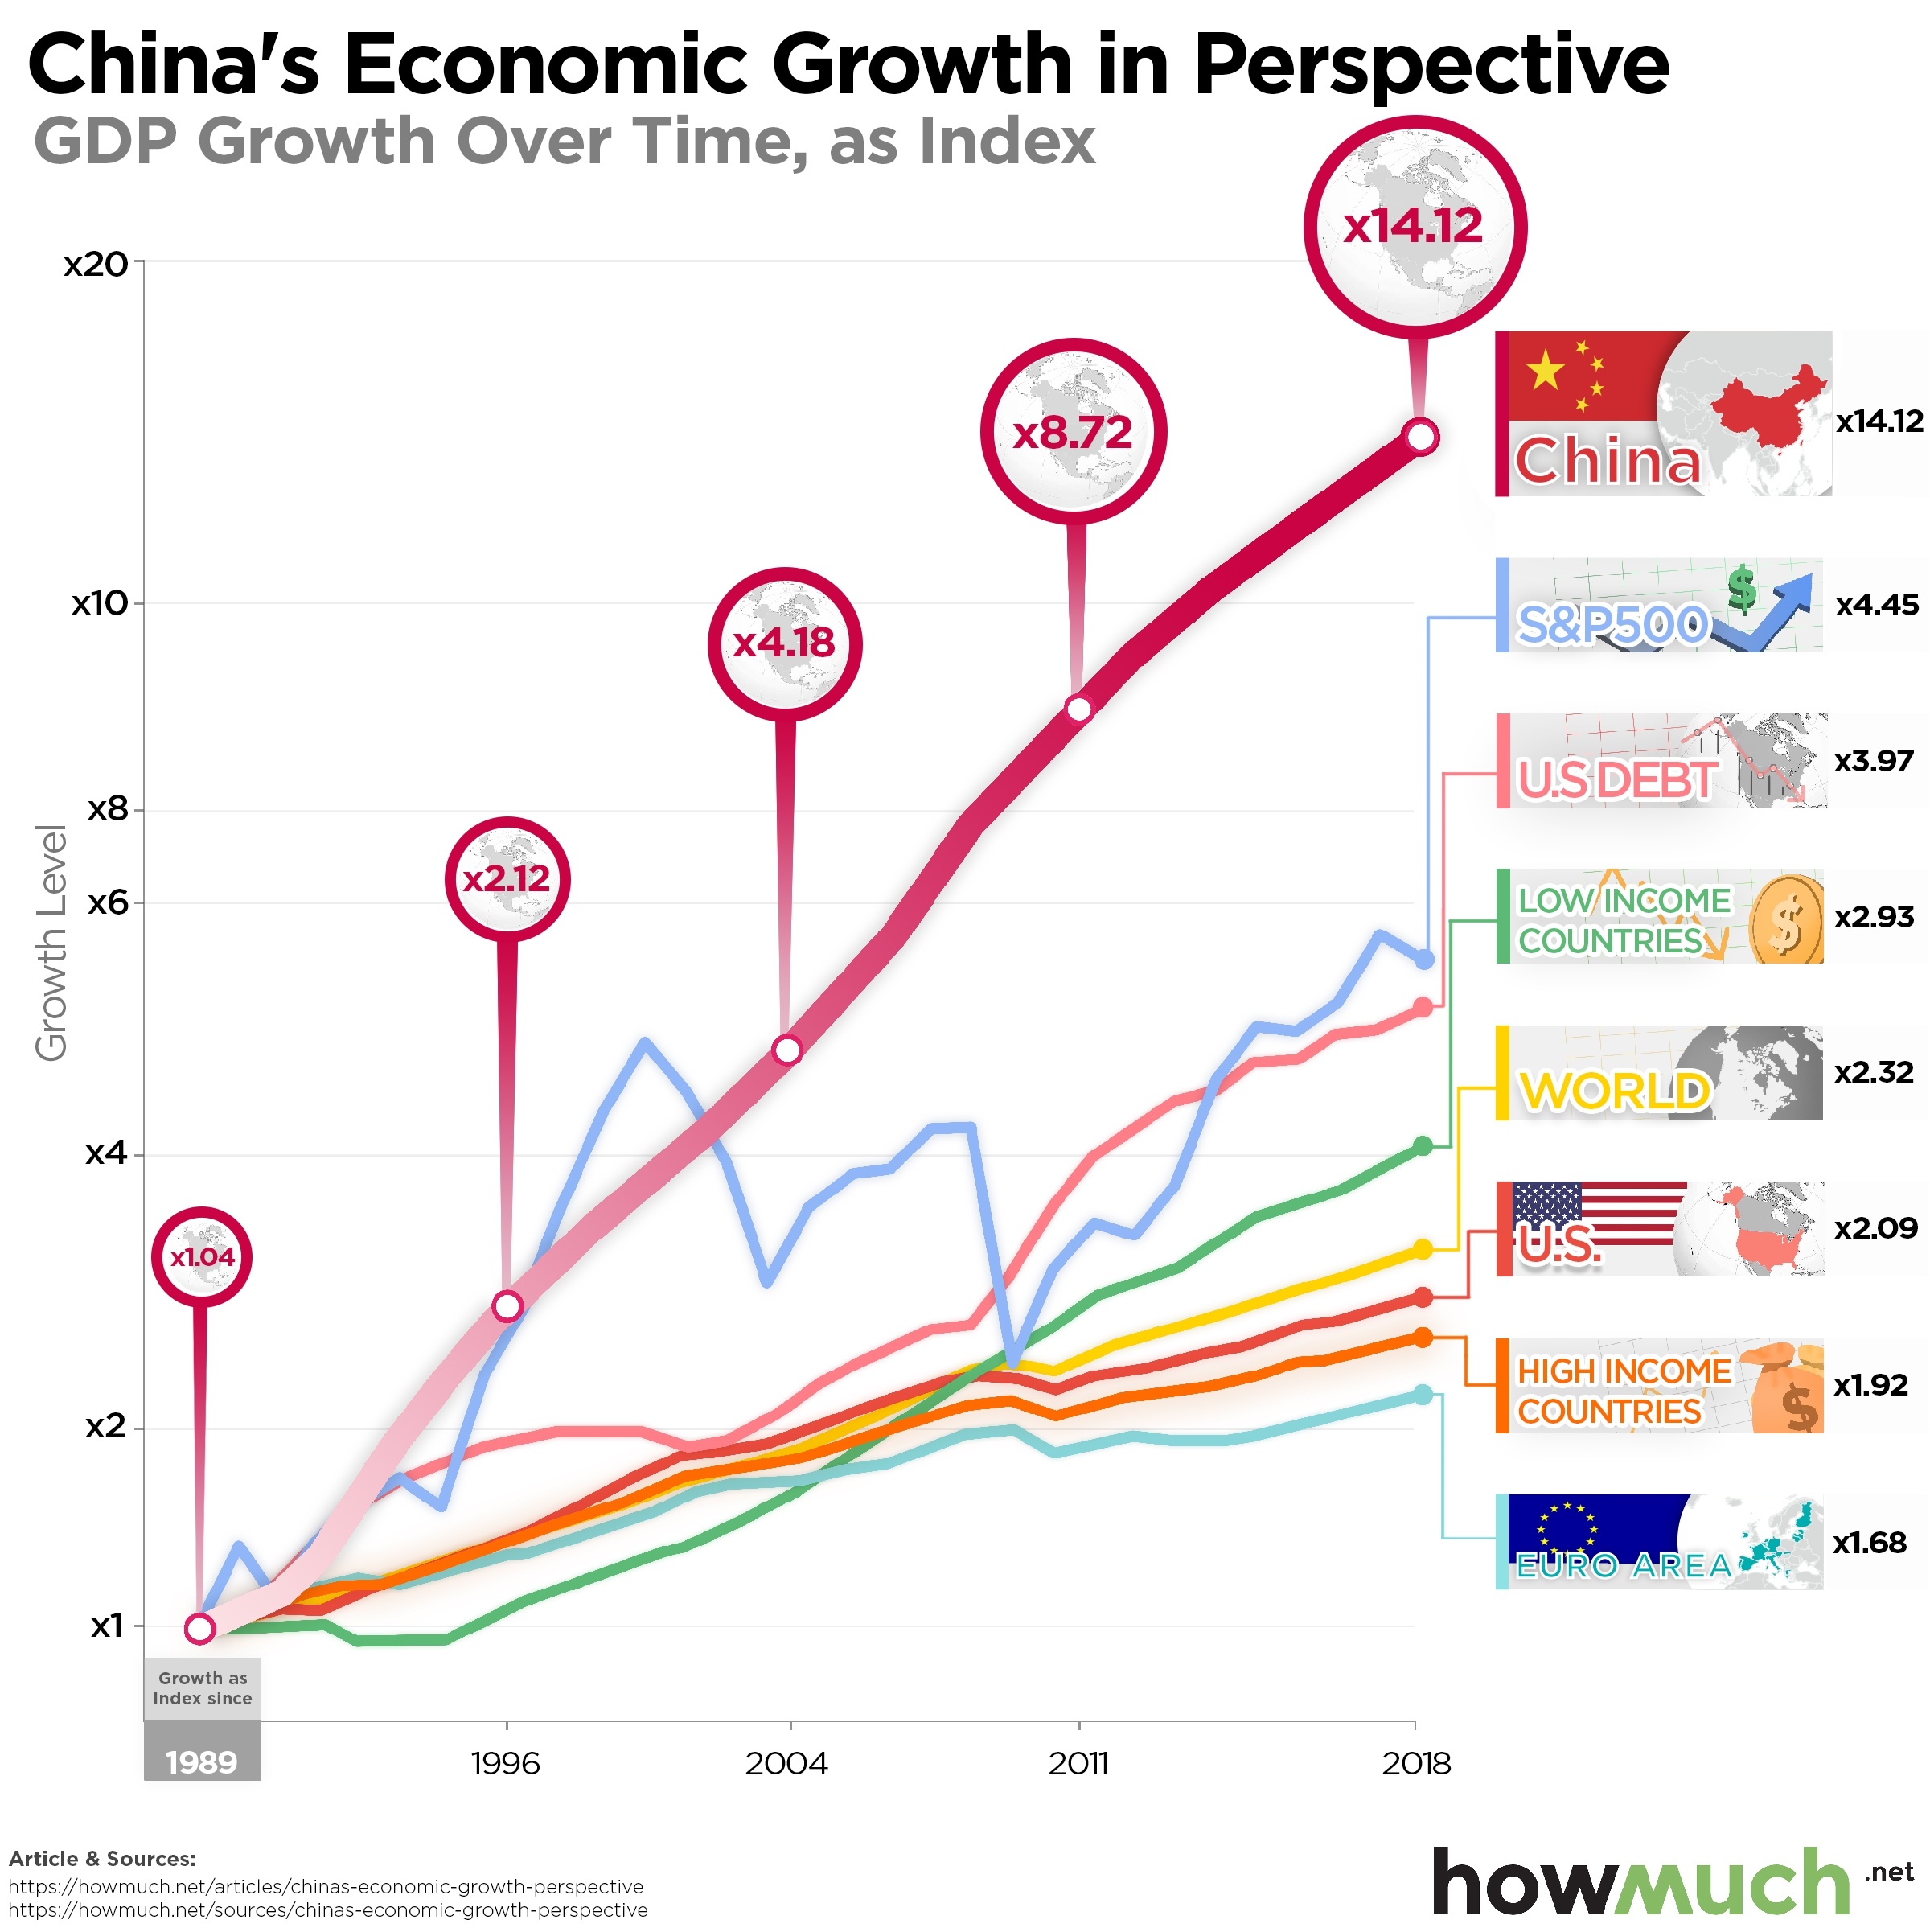 China's economic growth versus the economic growth of the rest of the world, over time.